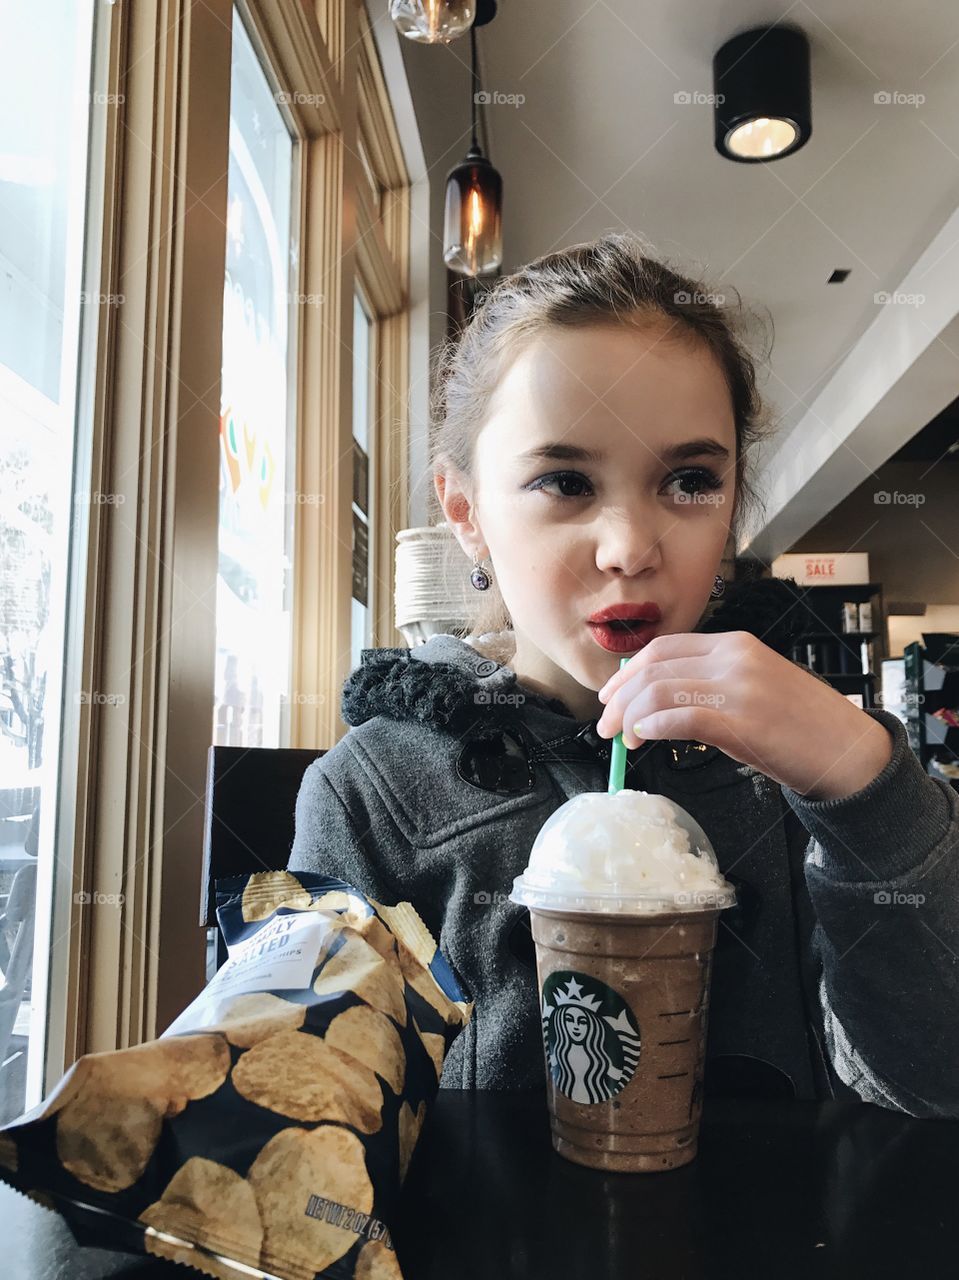 Cute, little girl with lipstick on drinking a Starbucks Frappuccino in the winter with a bag of chips and her coat on. 